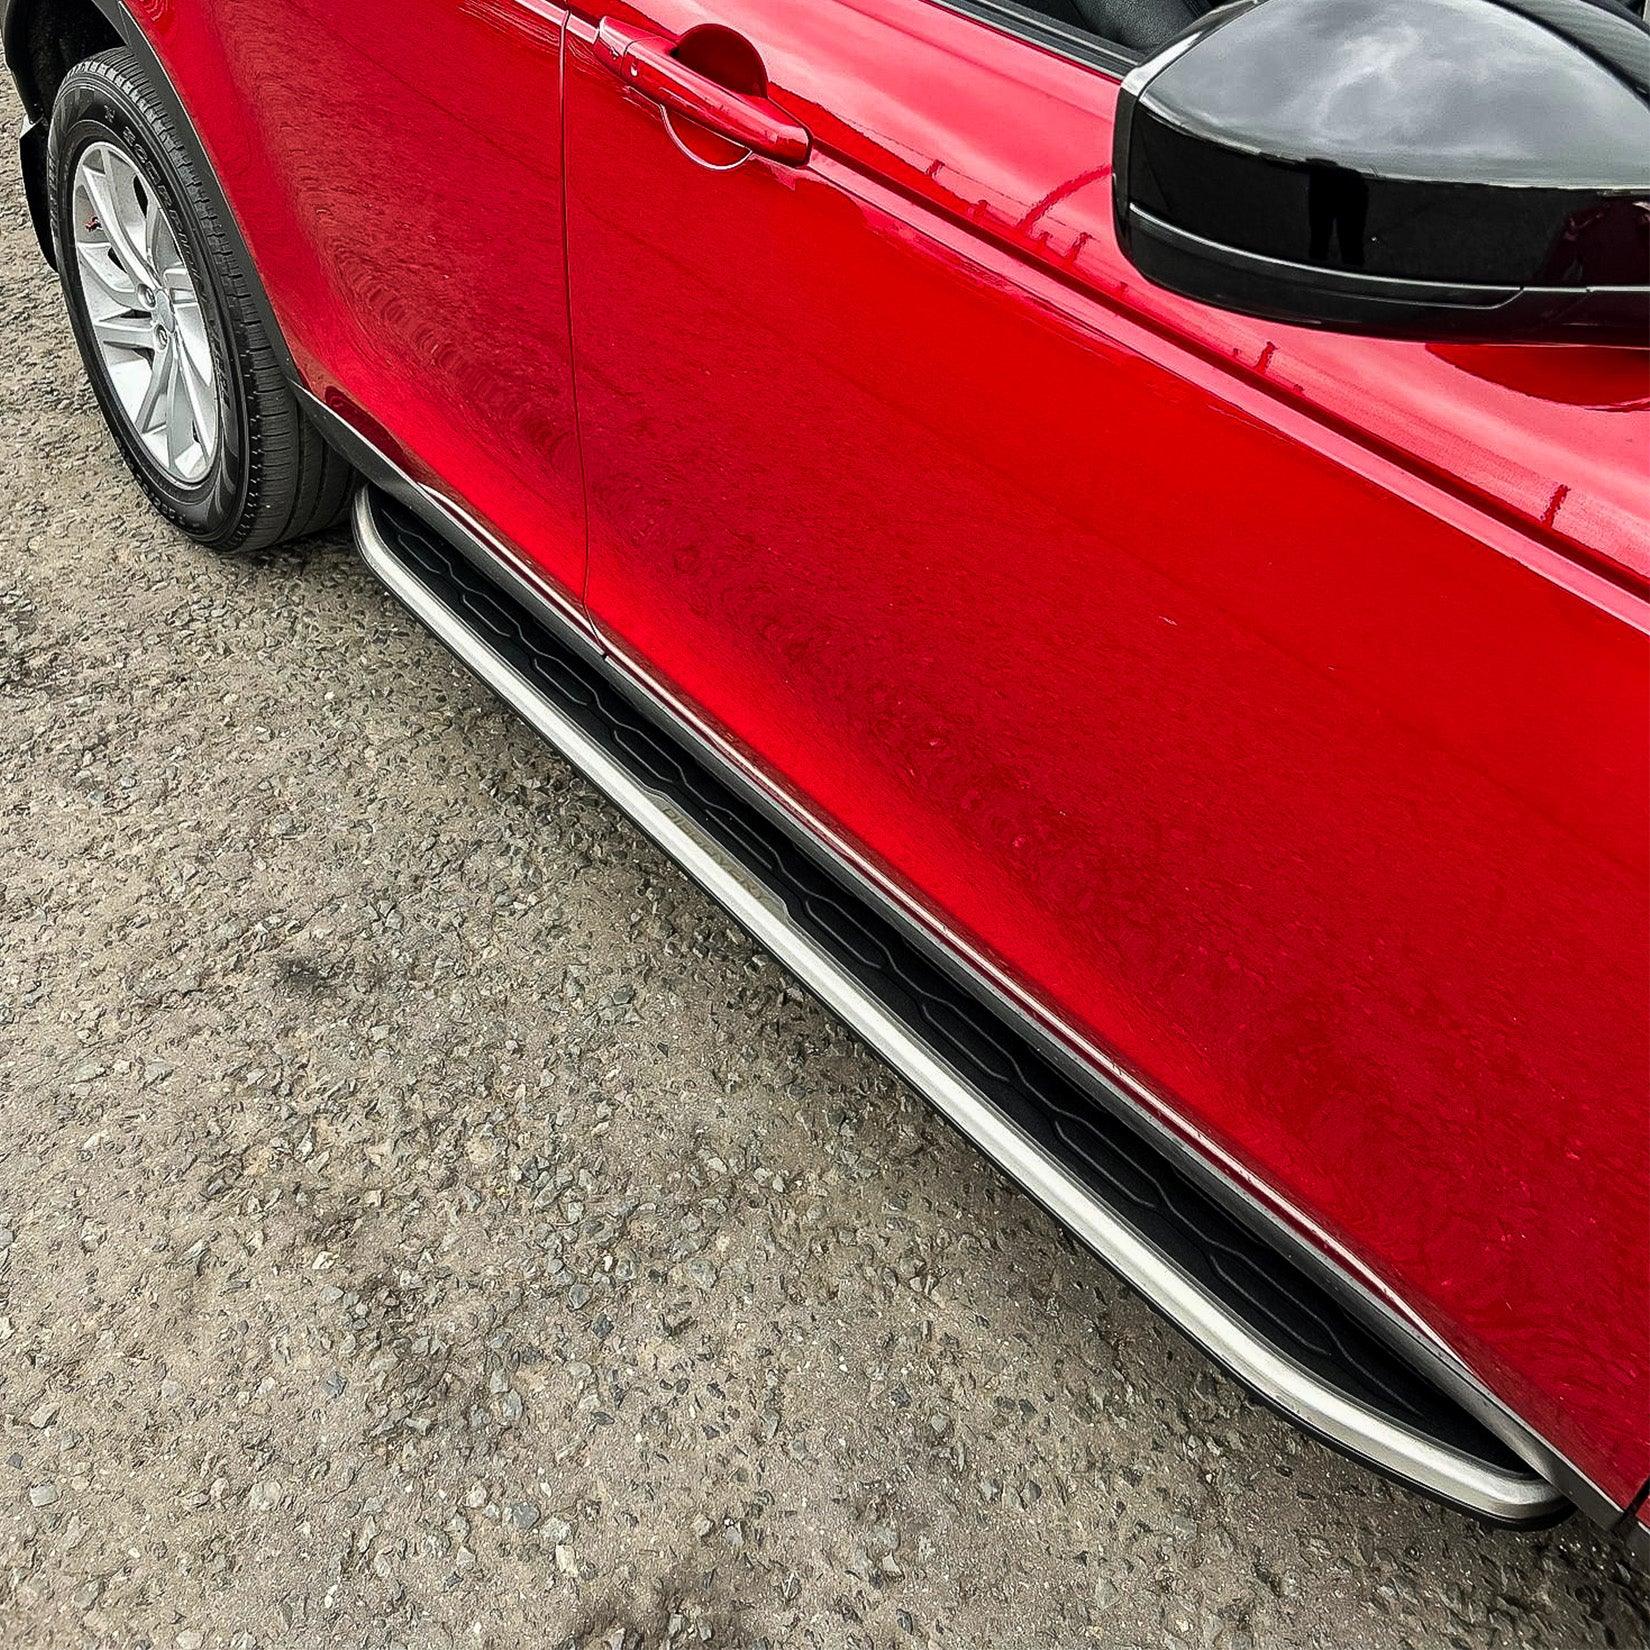 LAND ROVER DISCOVERY SPORT 2020 ON OEM STYLE SIDE STEPS RUNNING BOARDS – PAIR - RisperStyling